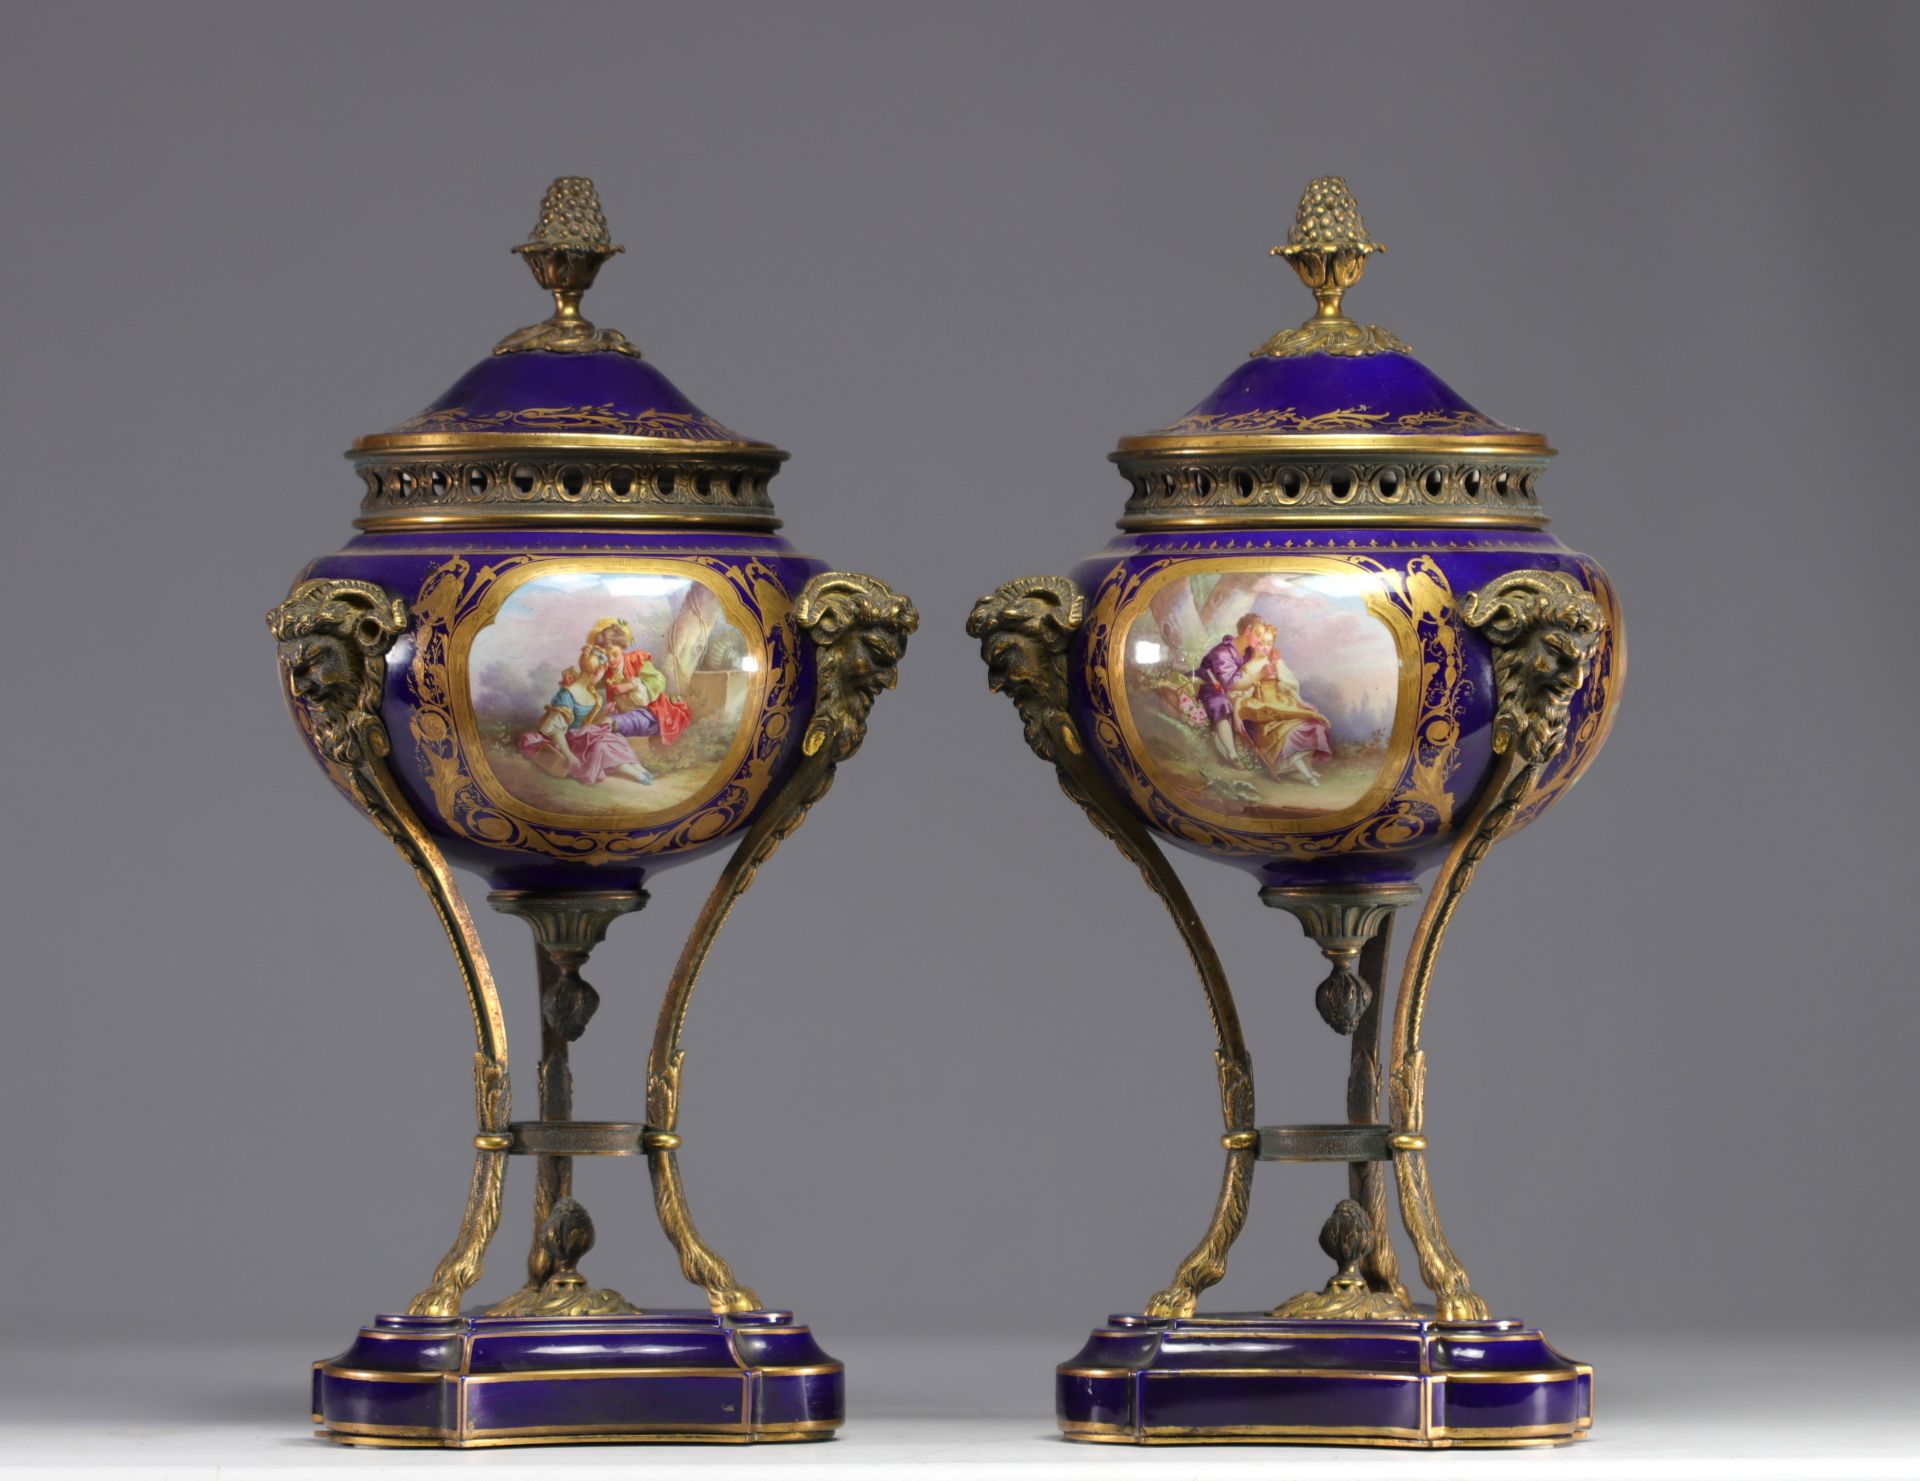 Pair of Sevres porcelain cassolettes decorated with gallant scenes, mounted on bronze.